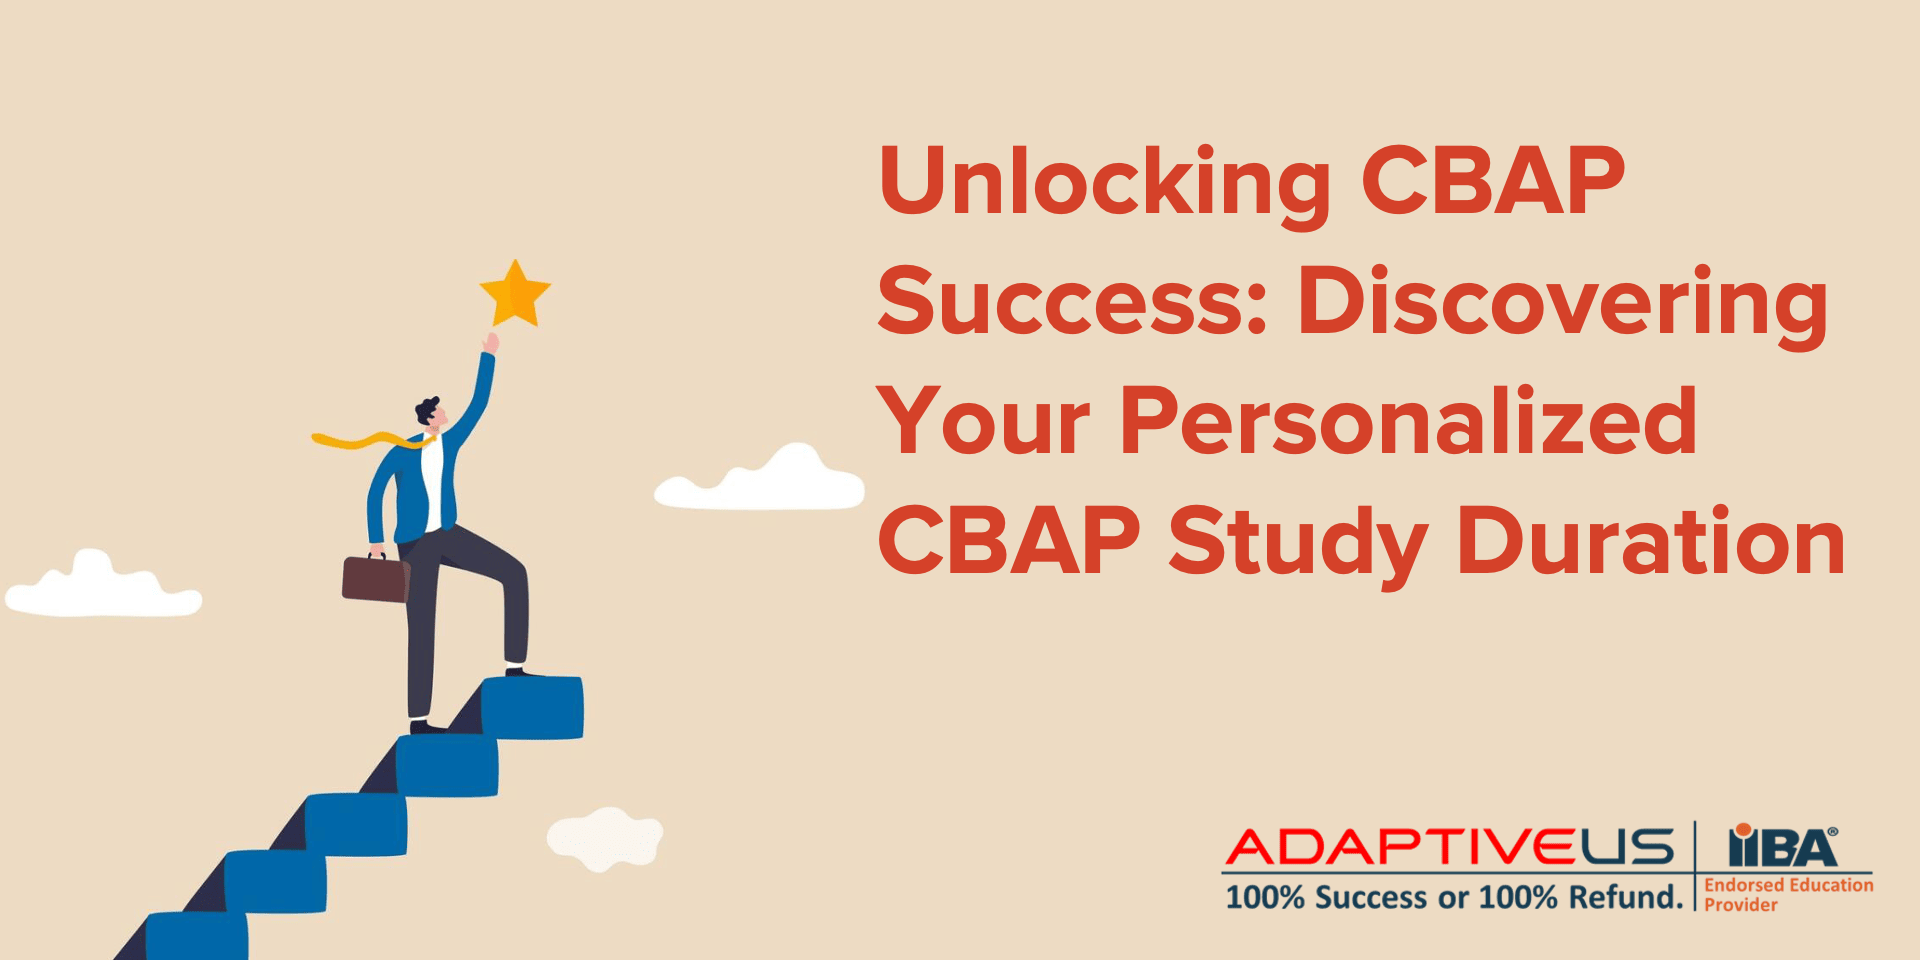 Unlocking CBAP Success- Discovering Your Personalized CBAP Study Duration